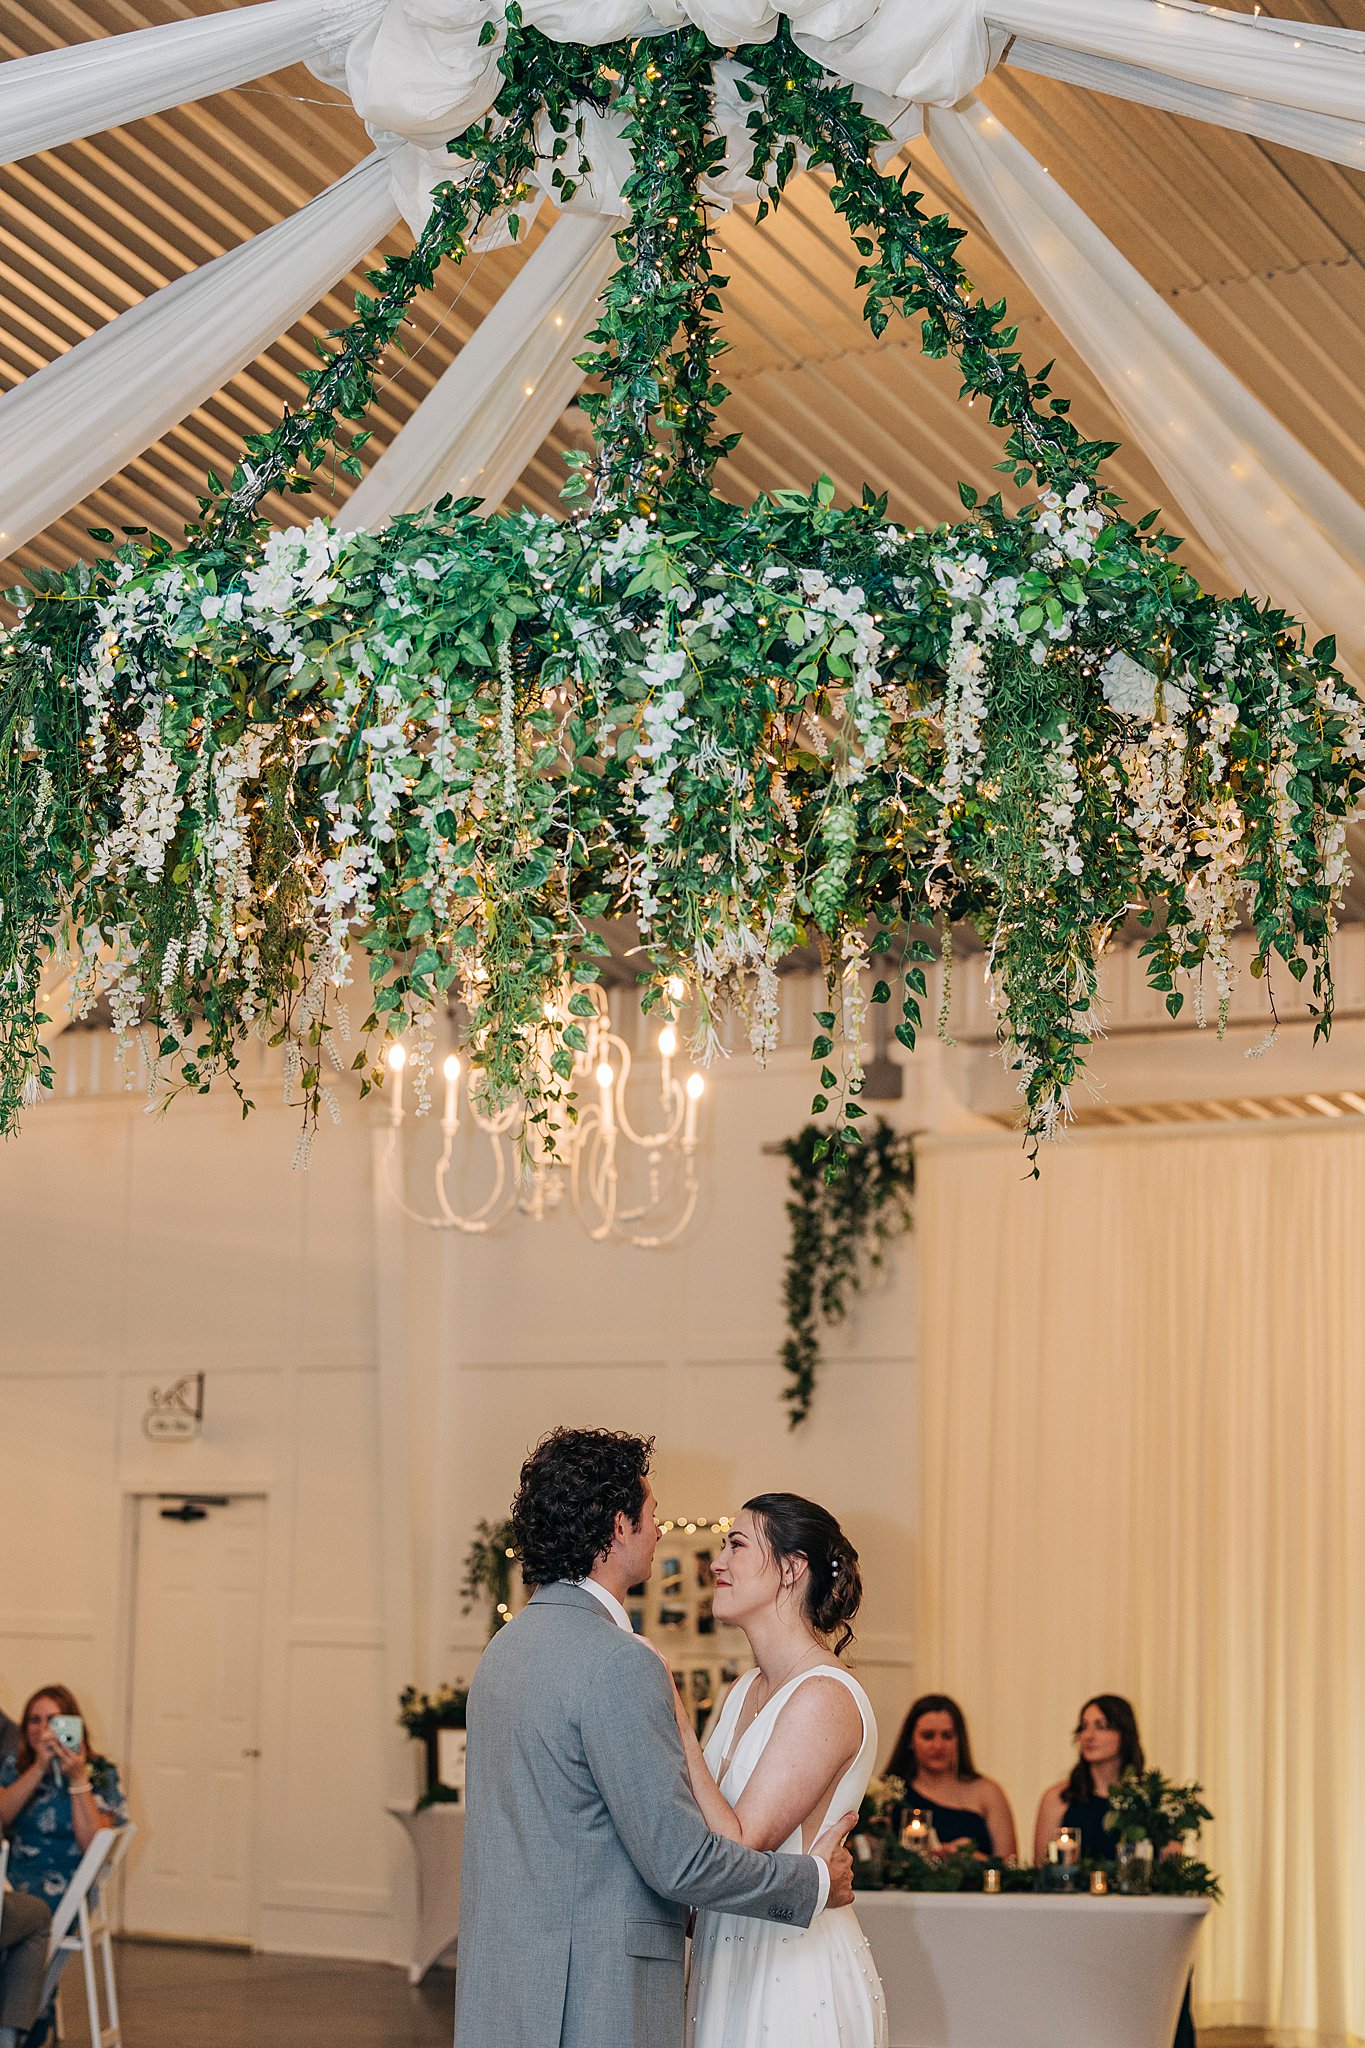 Newlyweds dance under a large living chandelier at their pinehill pavilion wedding